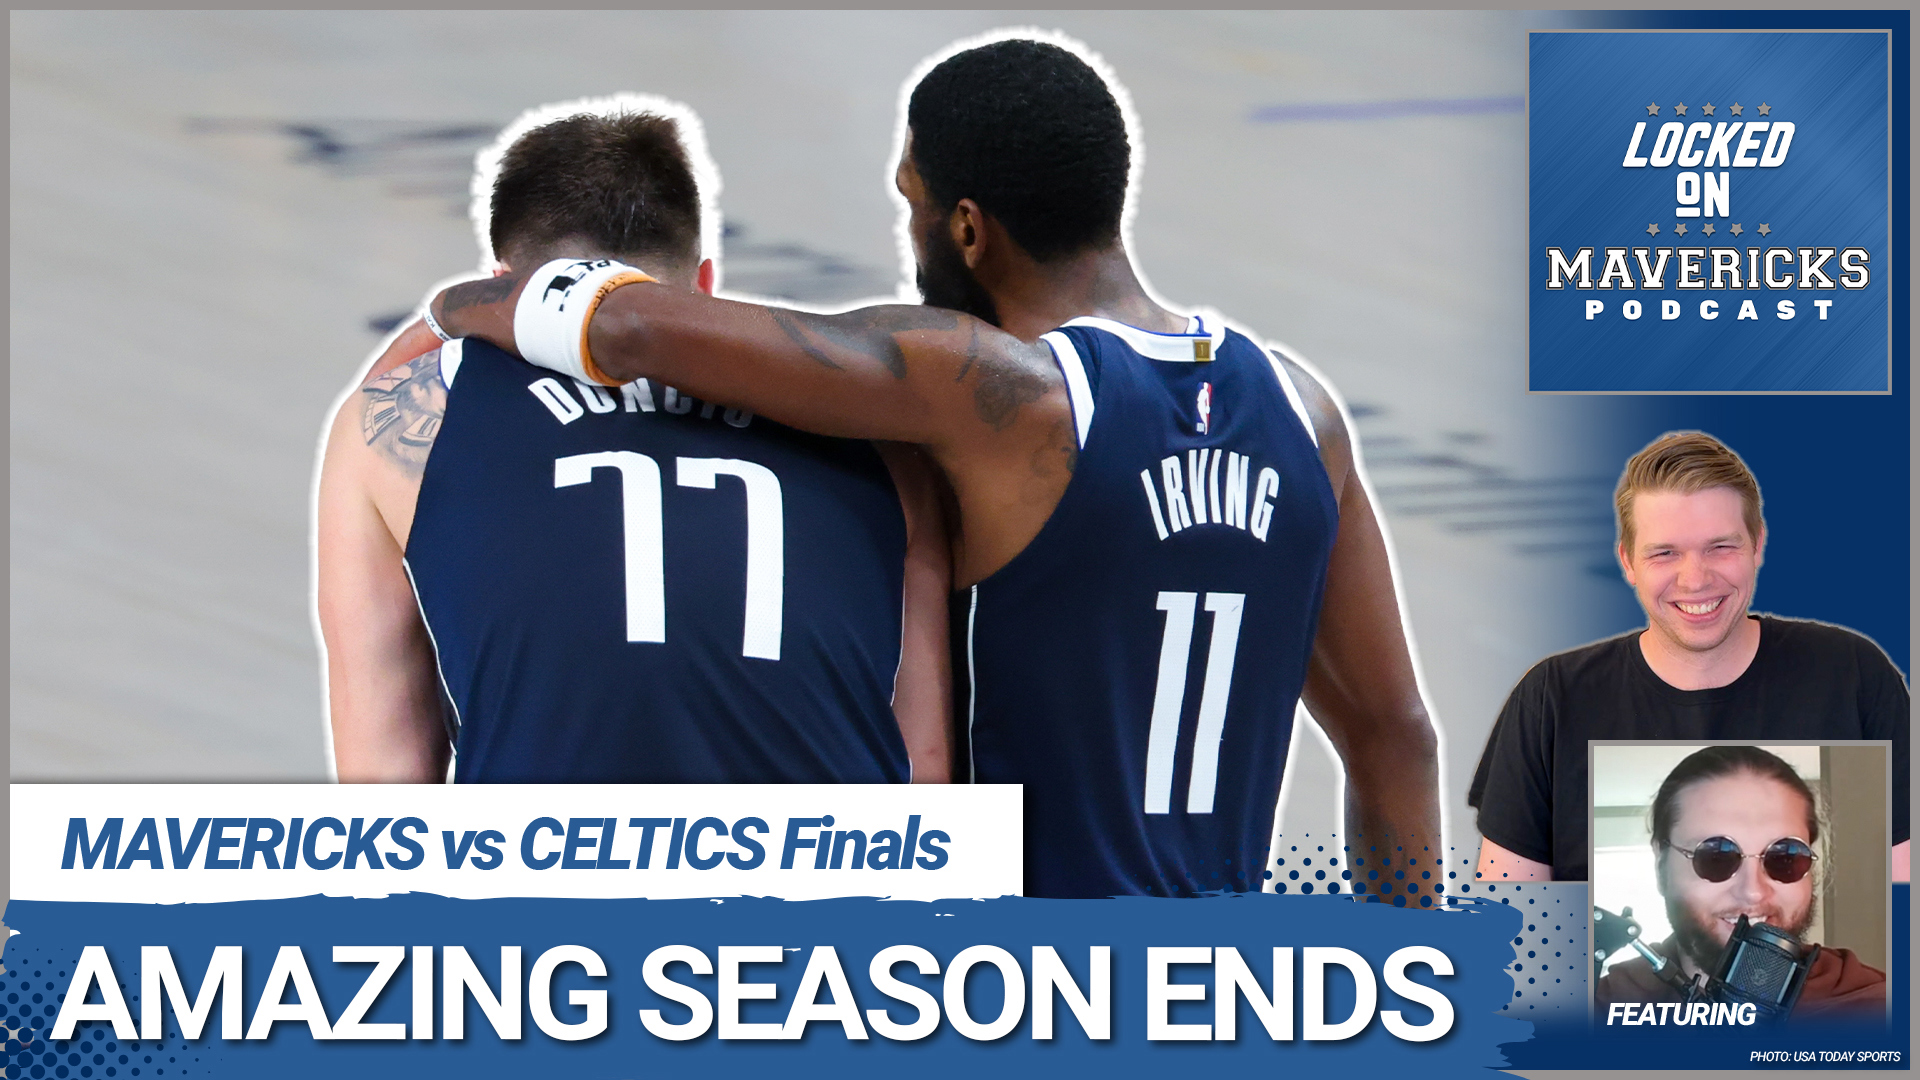 Nick Angstadt & Slightly Biased react to the Dallas Mavericks season ending in the NBA Finals to the Boston Celtics and what this season has meant to the Mavs.